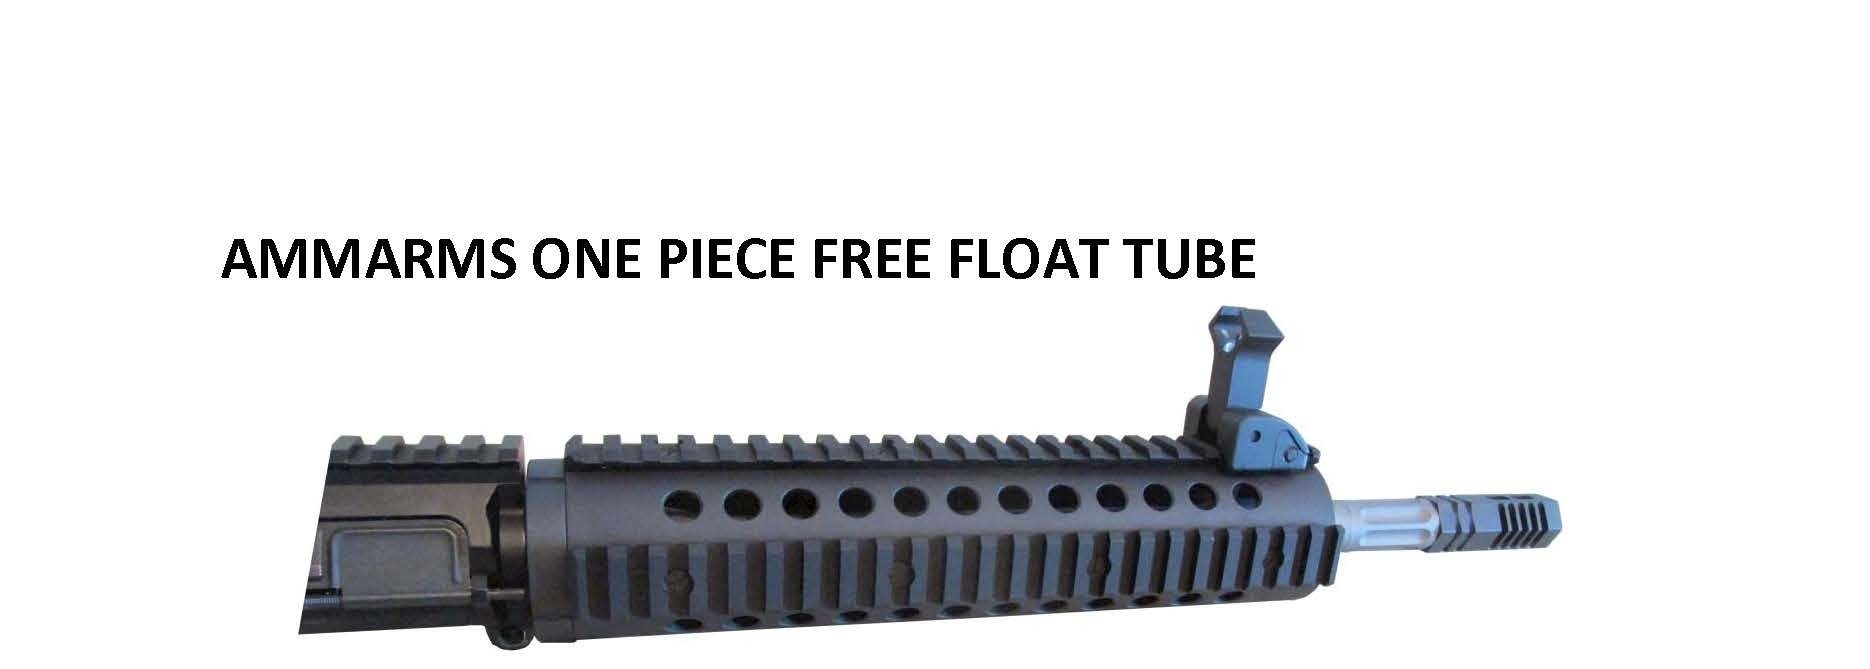 AMMARMS Free Floating Tube